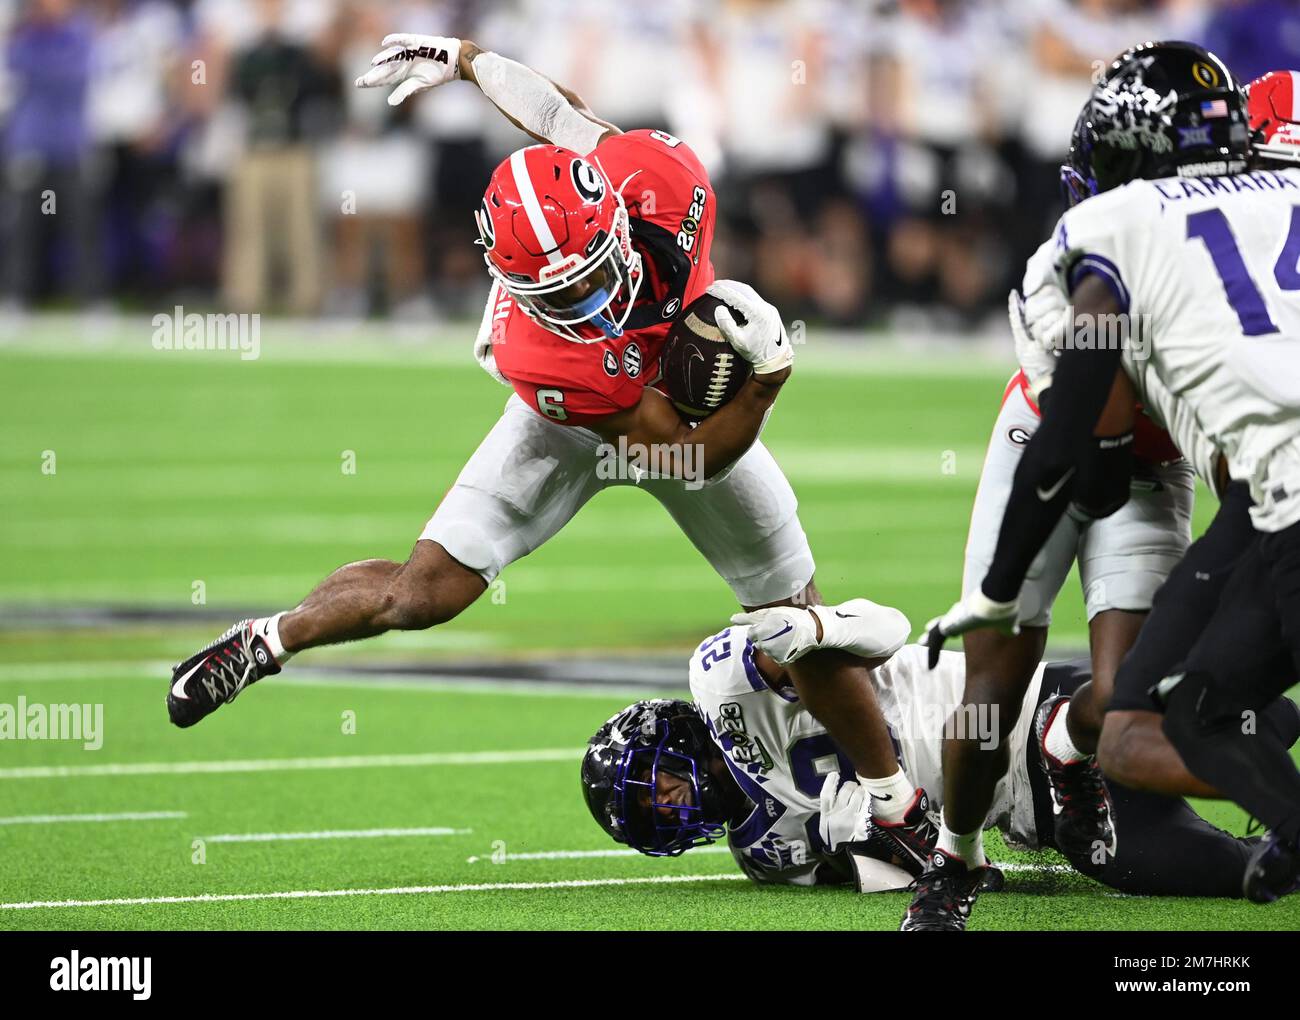 Inglewood, United States. 09th Jan, 2023. Kenny McIntosh #6 of the Georgia Bulldogs carries the football in the second half against the TCU Horned Frogs at the CFP National Championship game at SoFi Stadium in Inglewood, California, on Monday, January 9, 2023. Georgia defeated TCU 65-7. Photo by Mike Goulding/UPI Credit: UPI/Alamy Live News Stock Photo